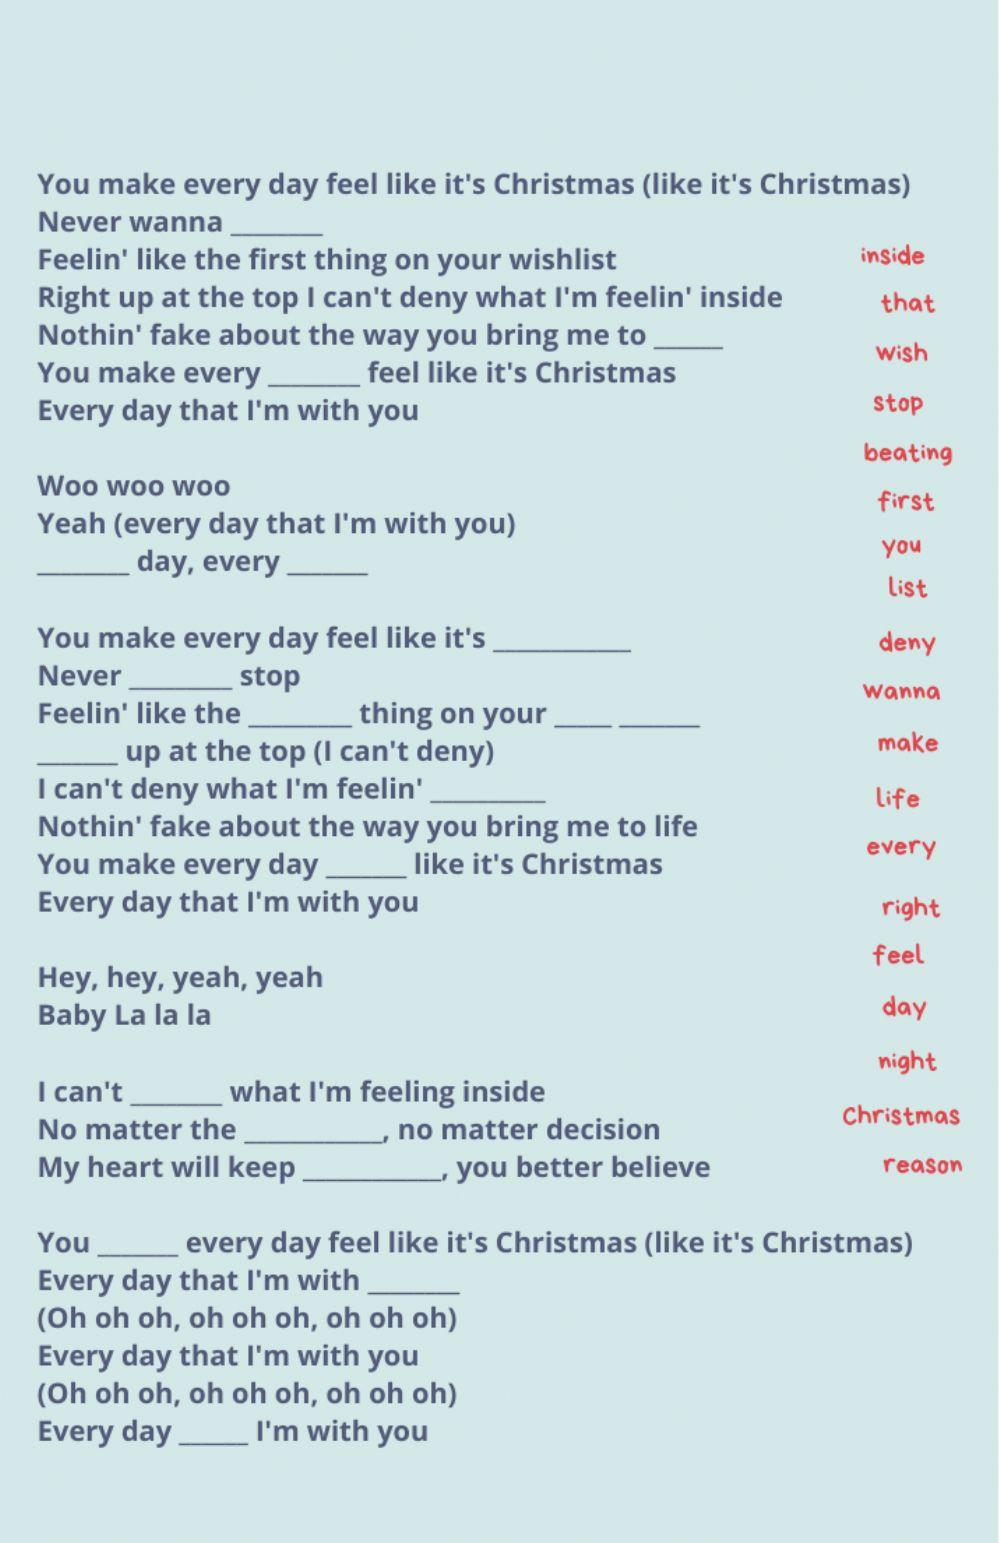 Chistmas song